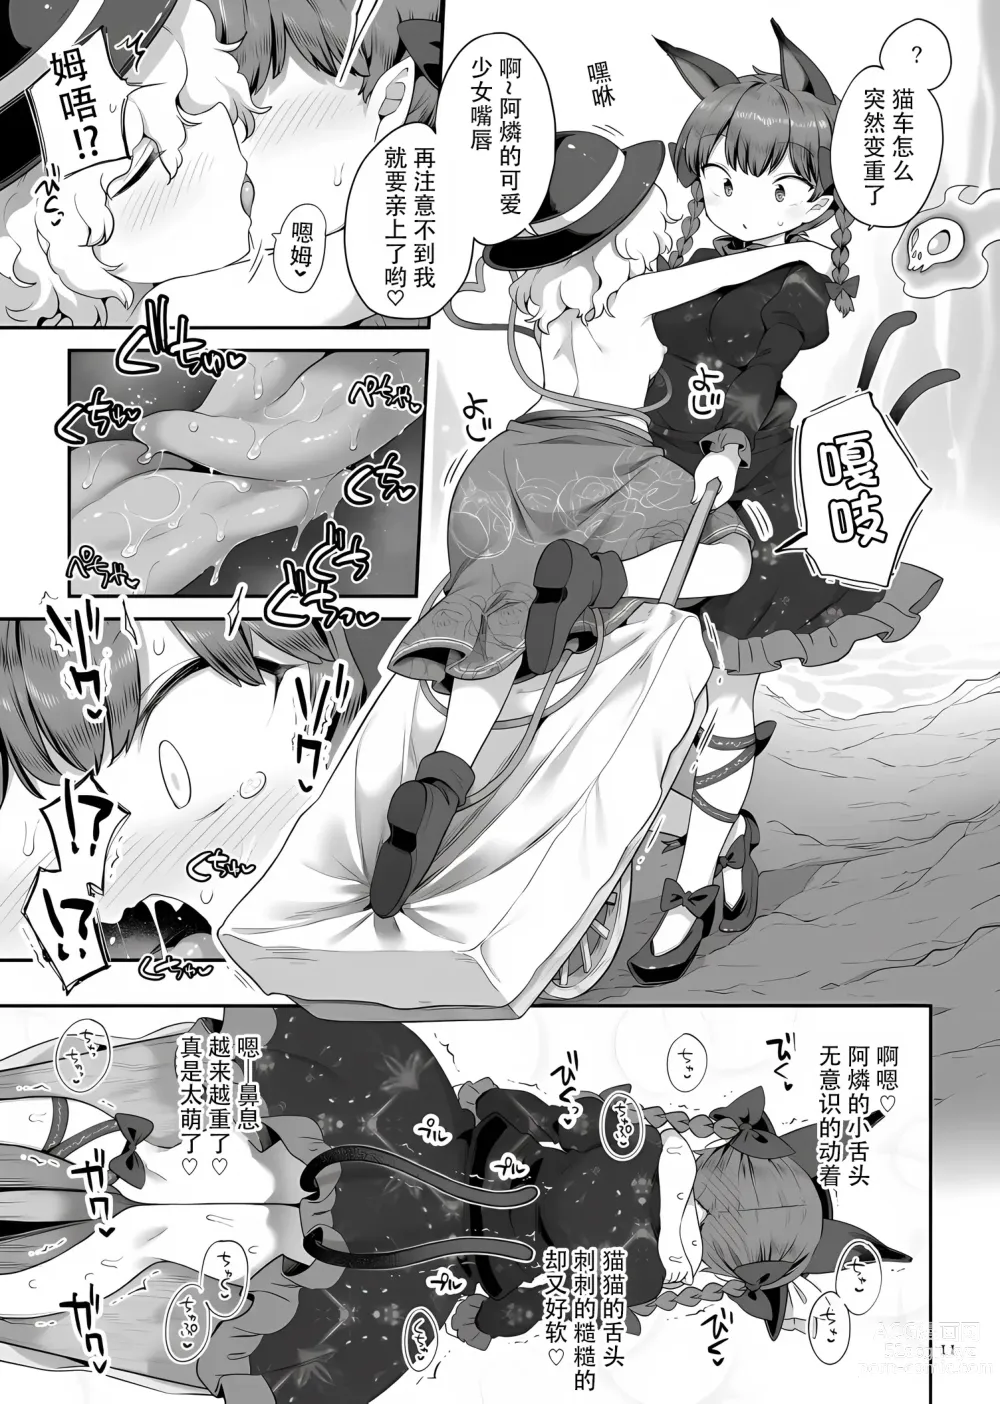 Page 11 of doujinshi [Unmei no Ikasumi (Harusame) Super Id (Touhou Project) [Chinese] [79%汉化组] [Digital]